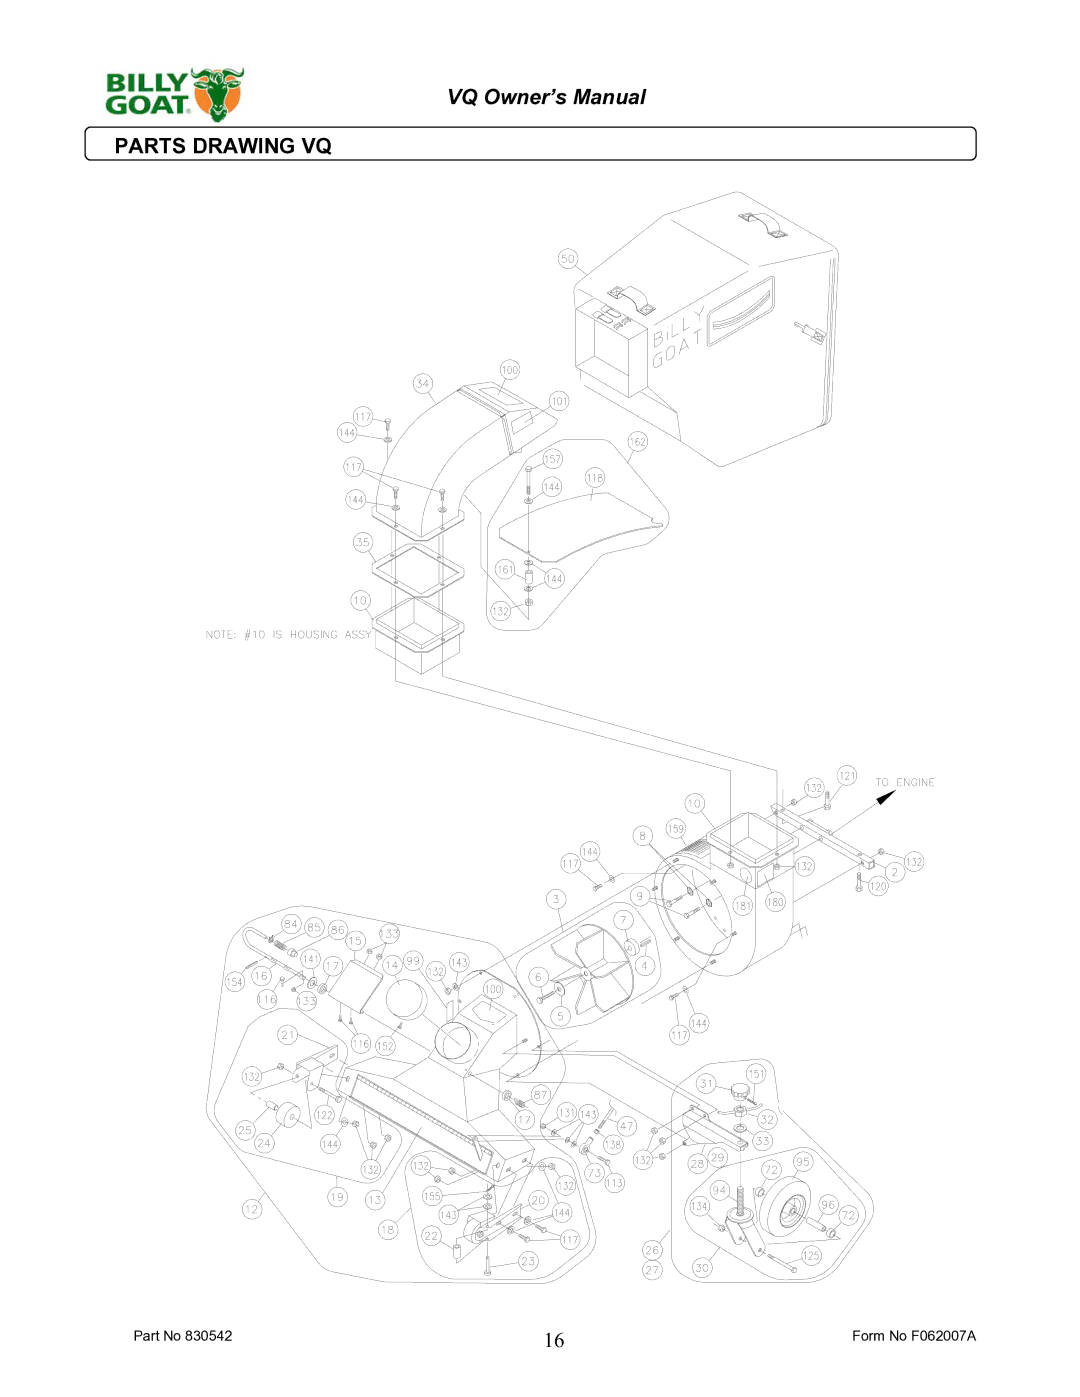 Billy Goat VQ902SPH, VQ1002SP owner manual Parts Drawing VQ 